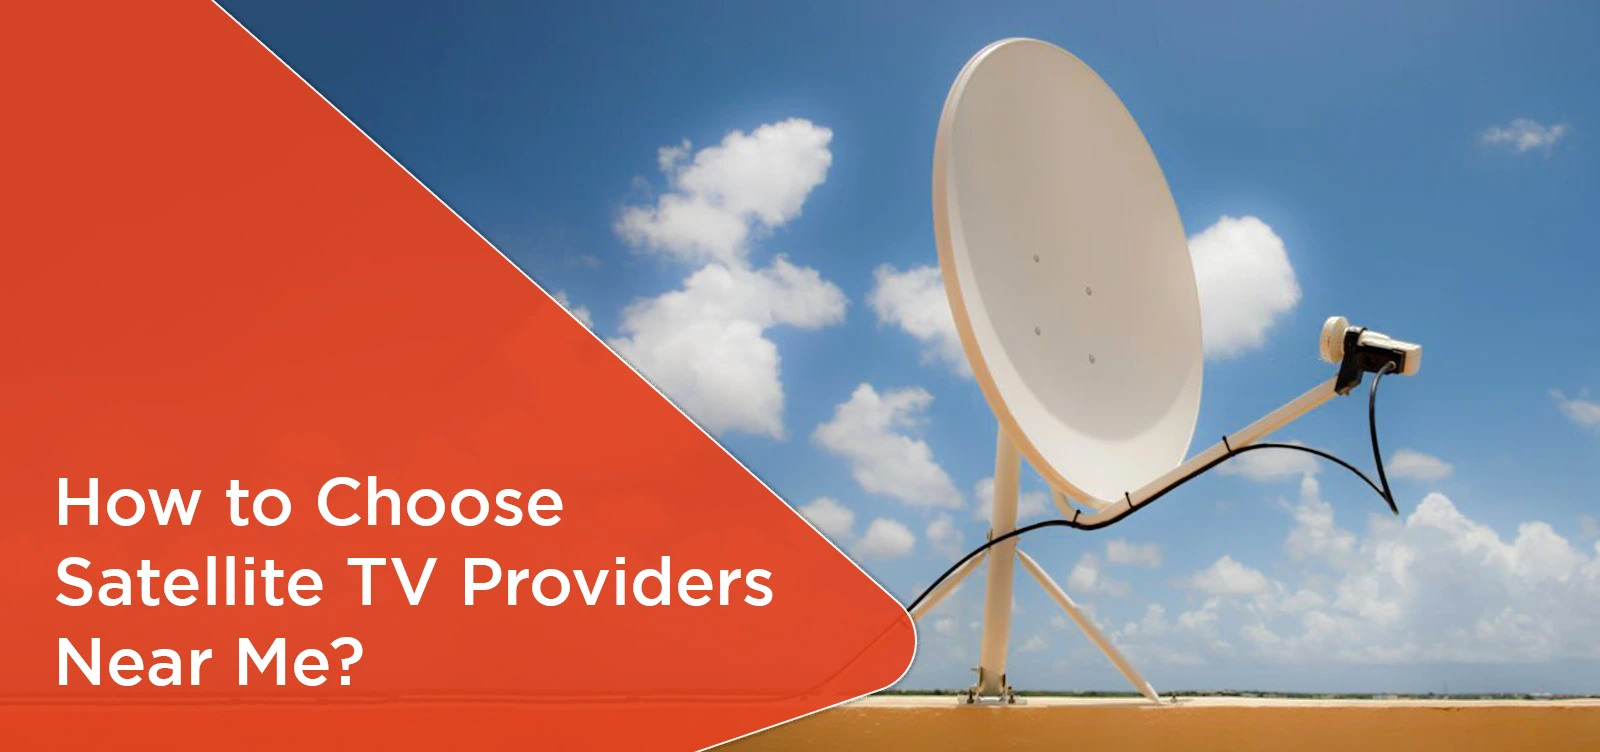 How to Choose Satellite TV Providers Near Me?